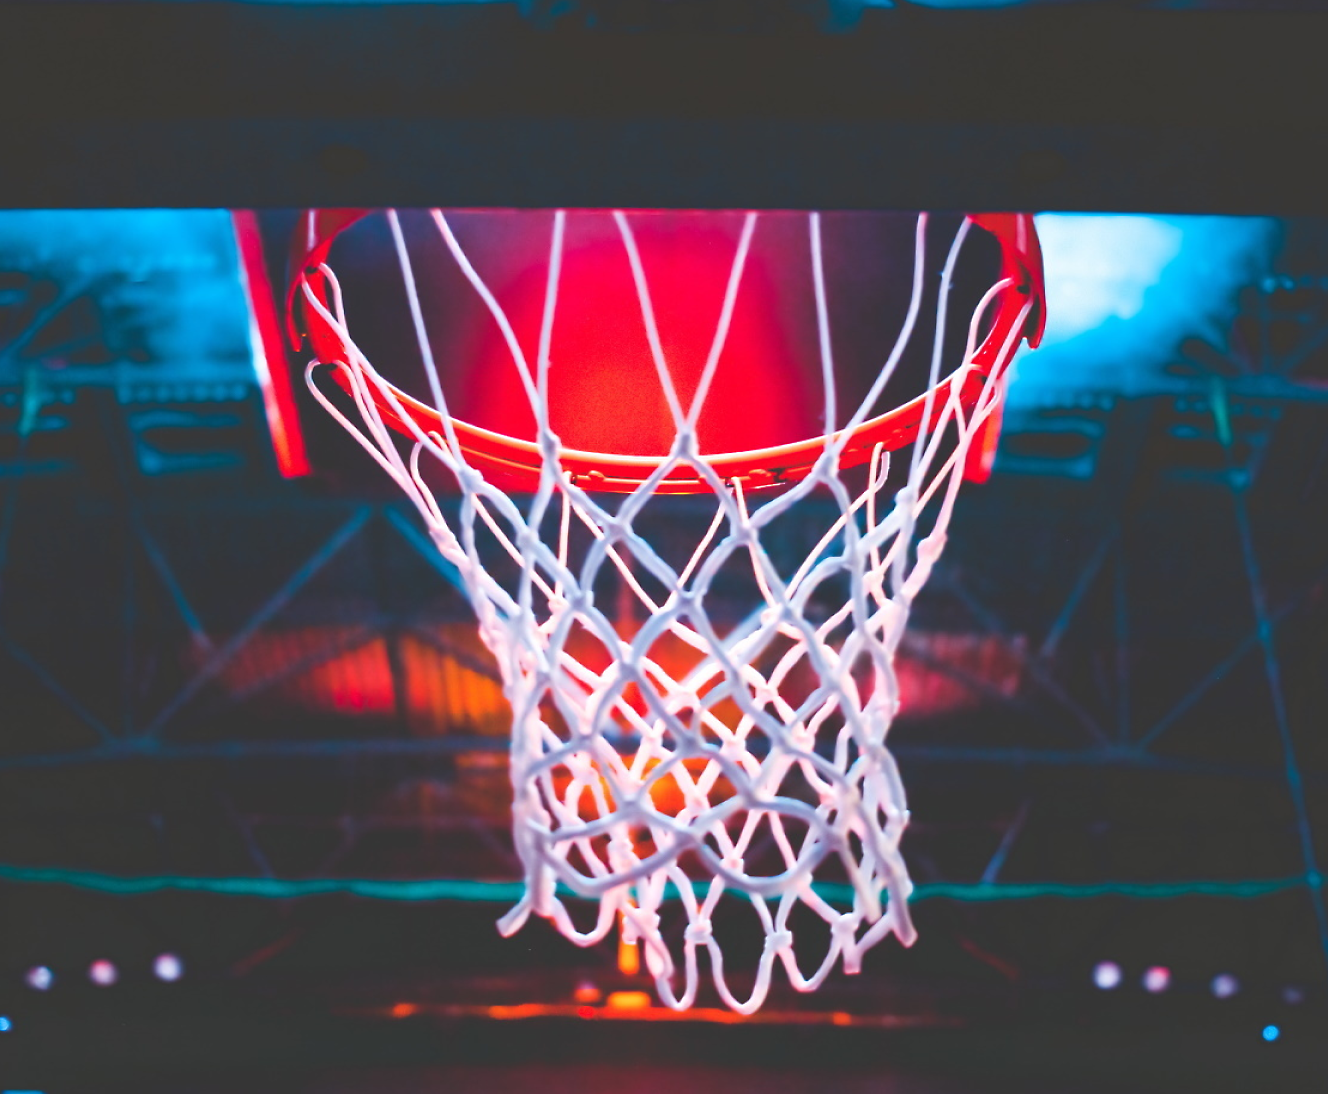 Basketball hoop illuminated by red light from below with a blurred background.